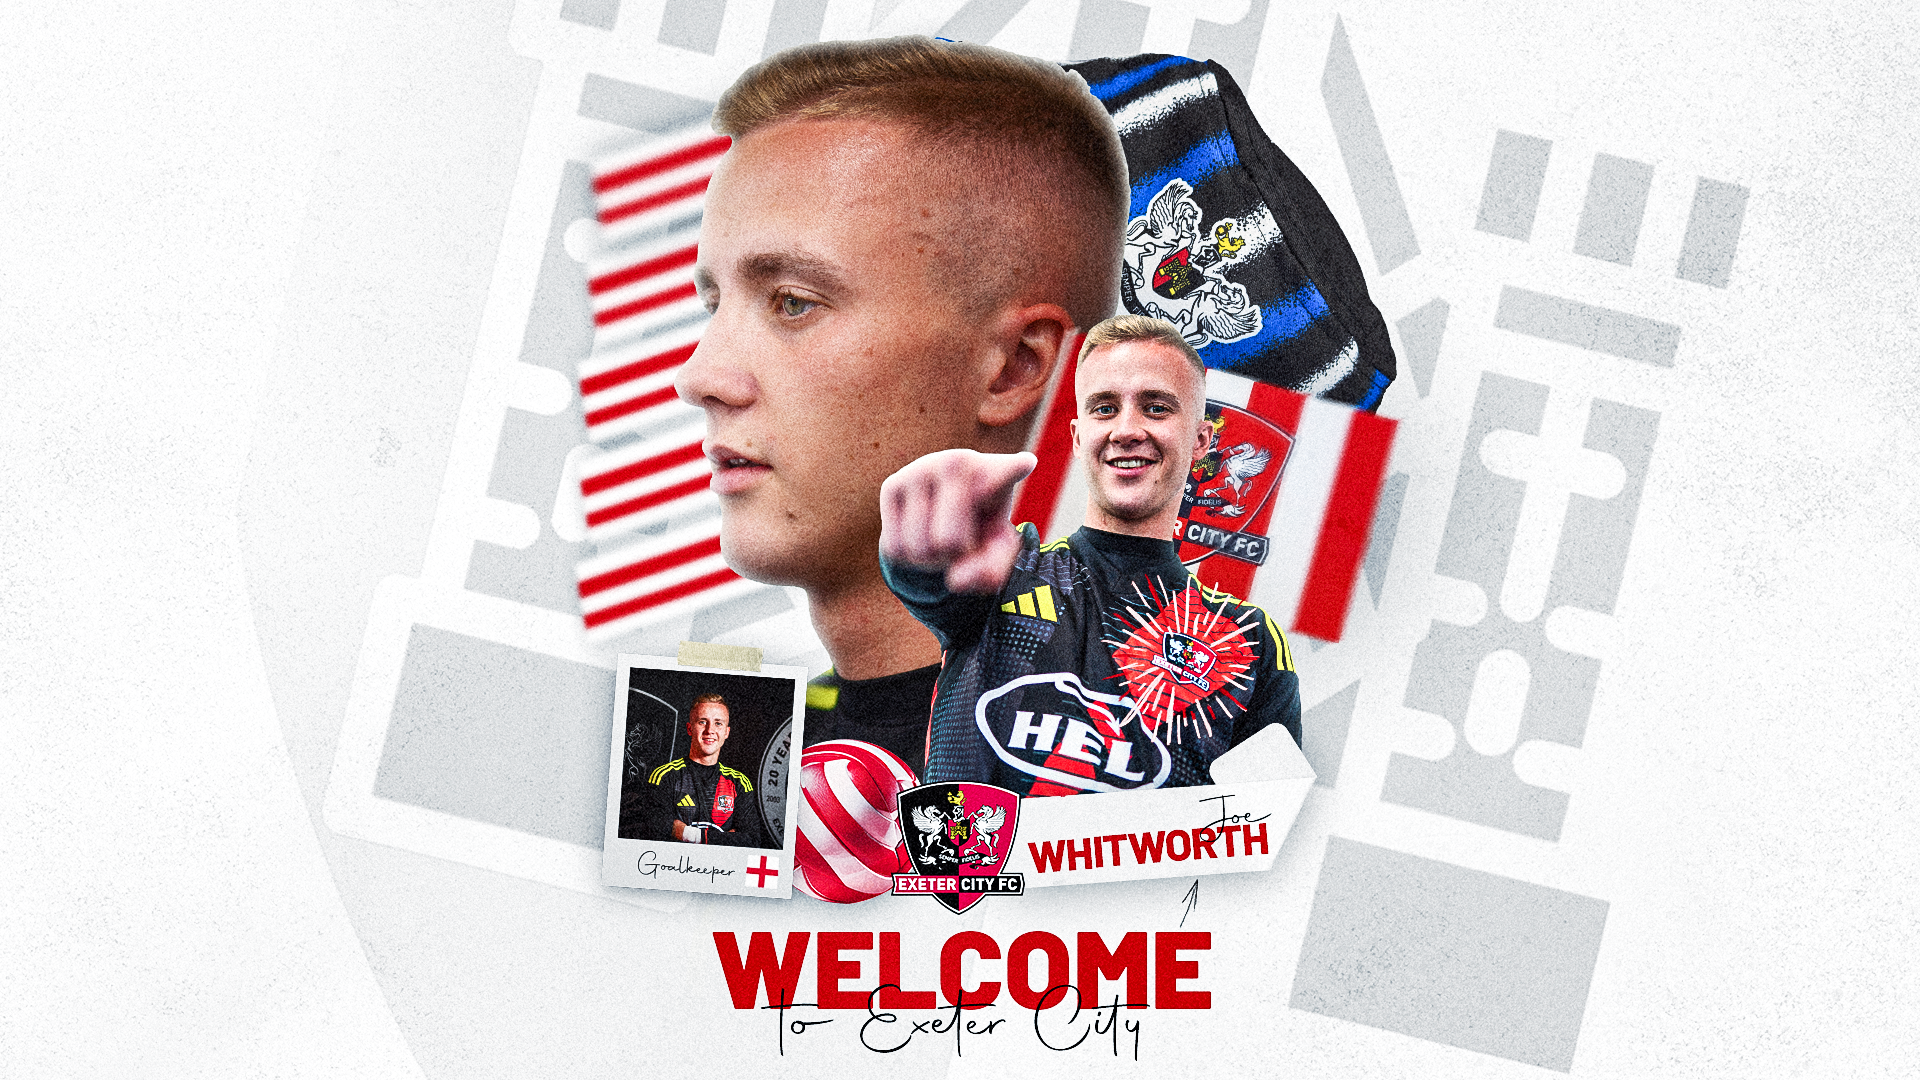 Welcome to Exeter City, Joe Whitworth!